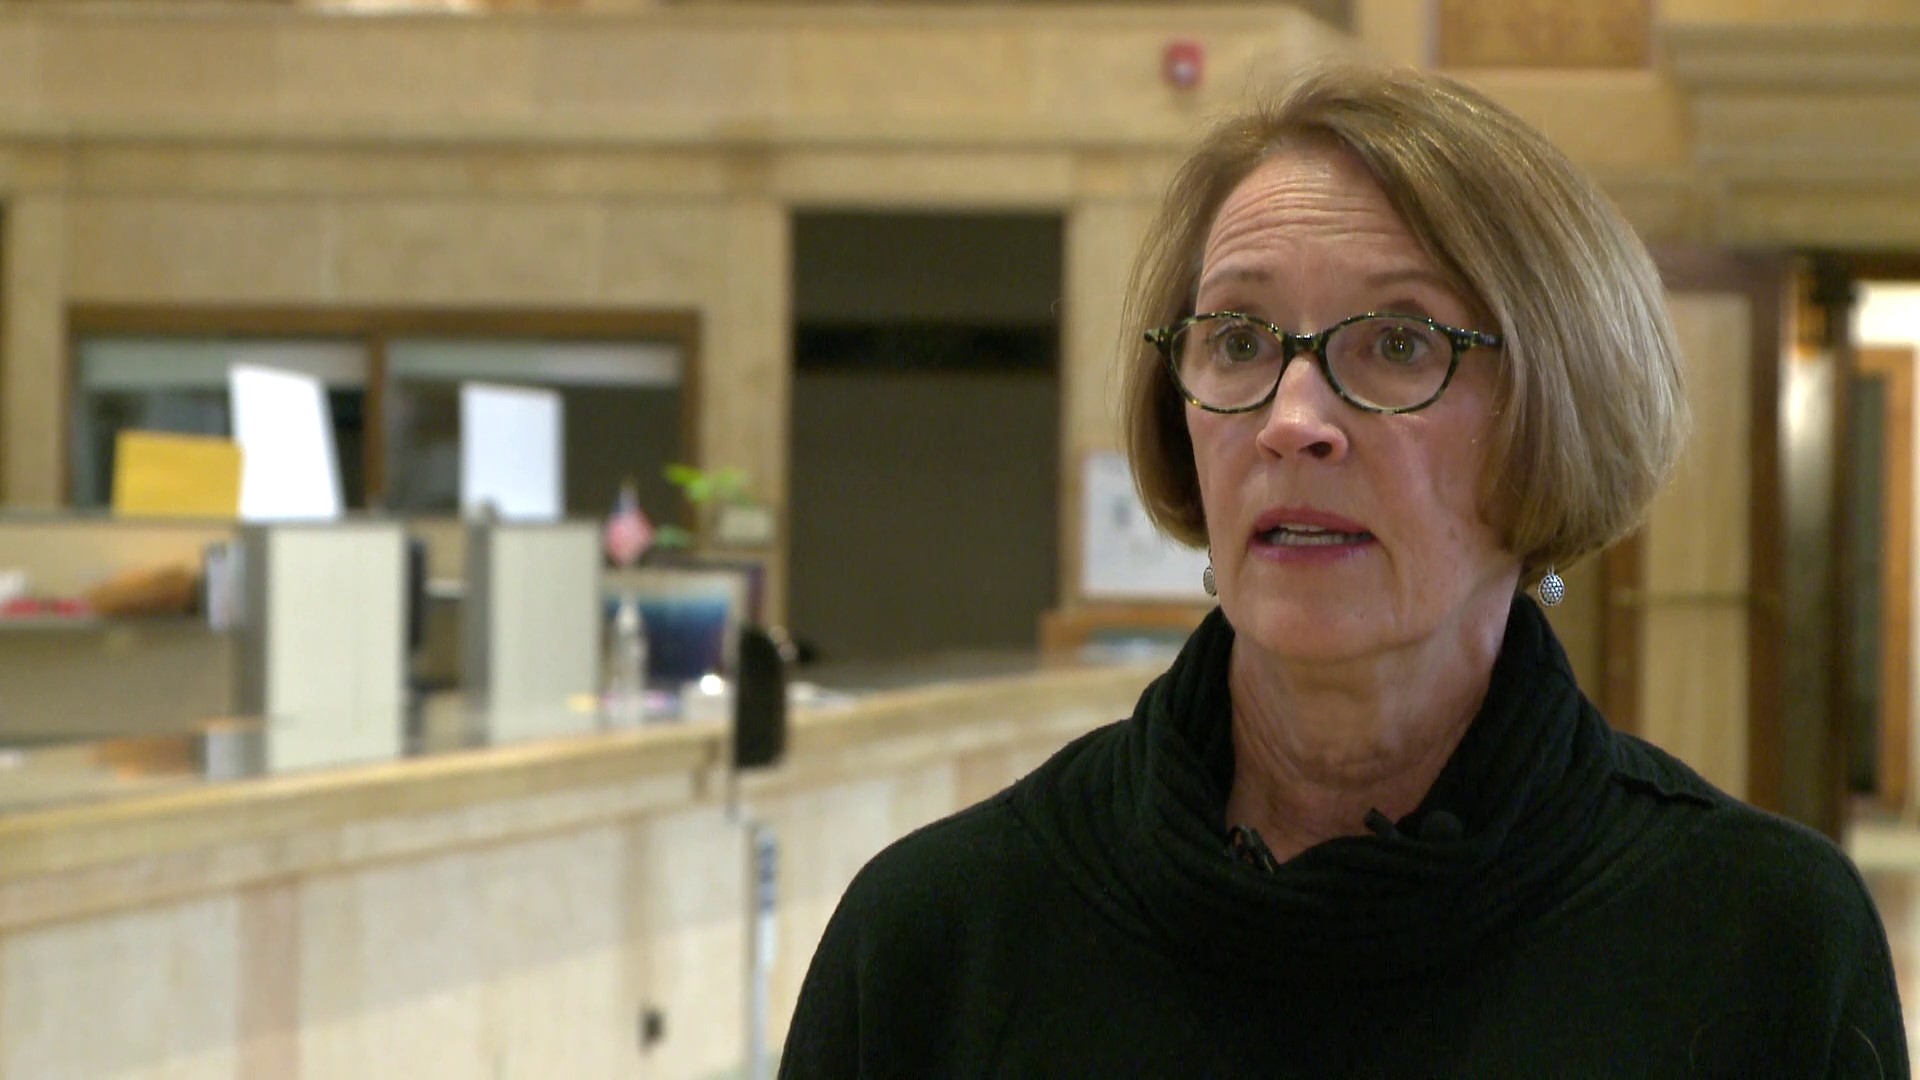 Des Moines residents elected Connie Boesen as mayor on Election Day, but her first official day wasn't until Tuesday.